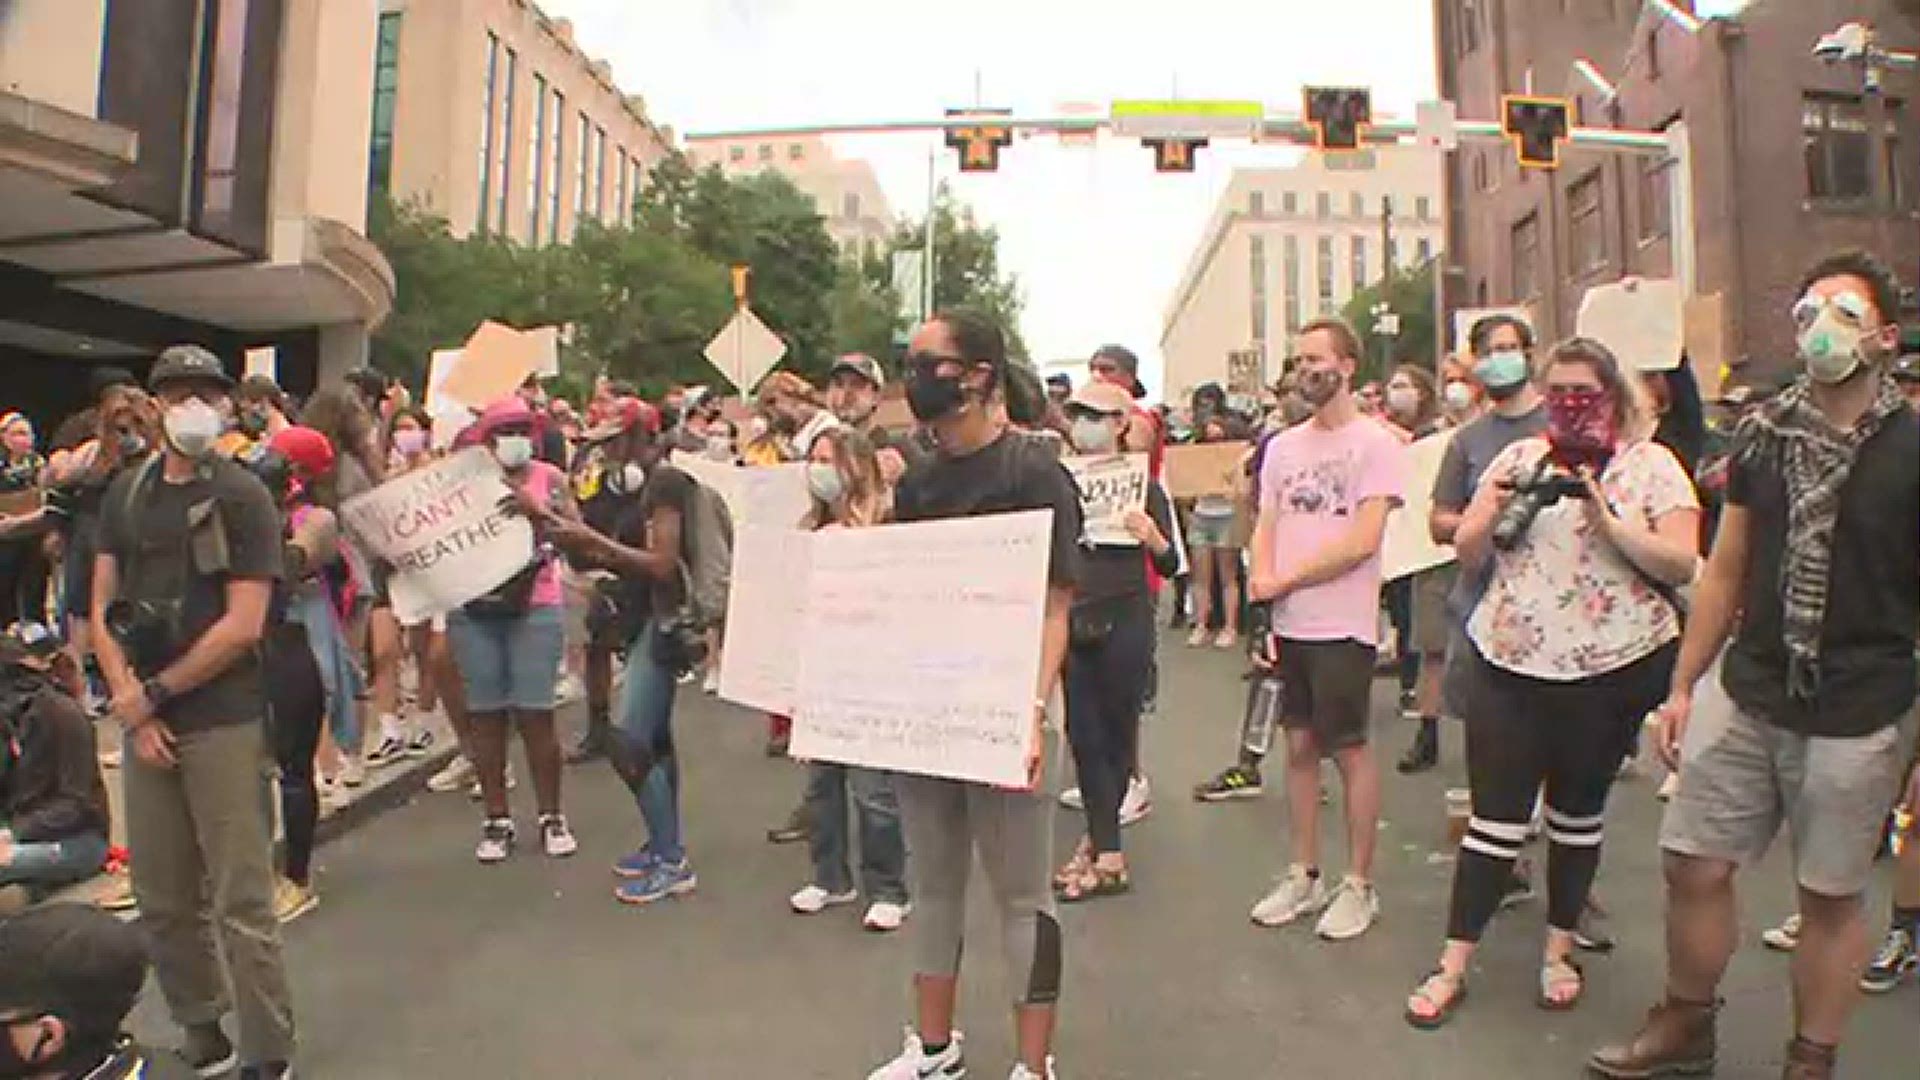 This is the fourth day of protests in Downtown Atlanta